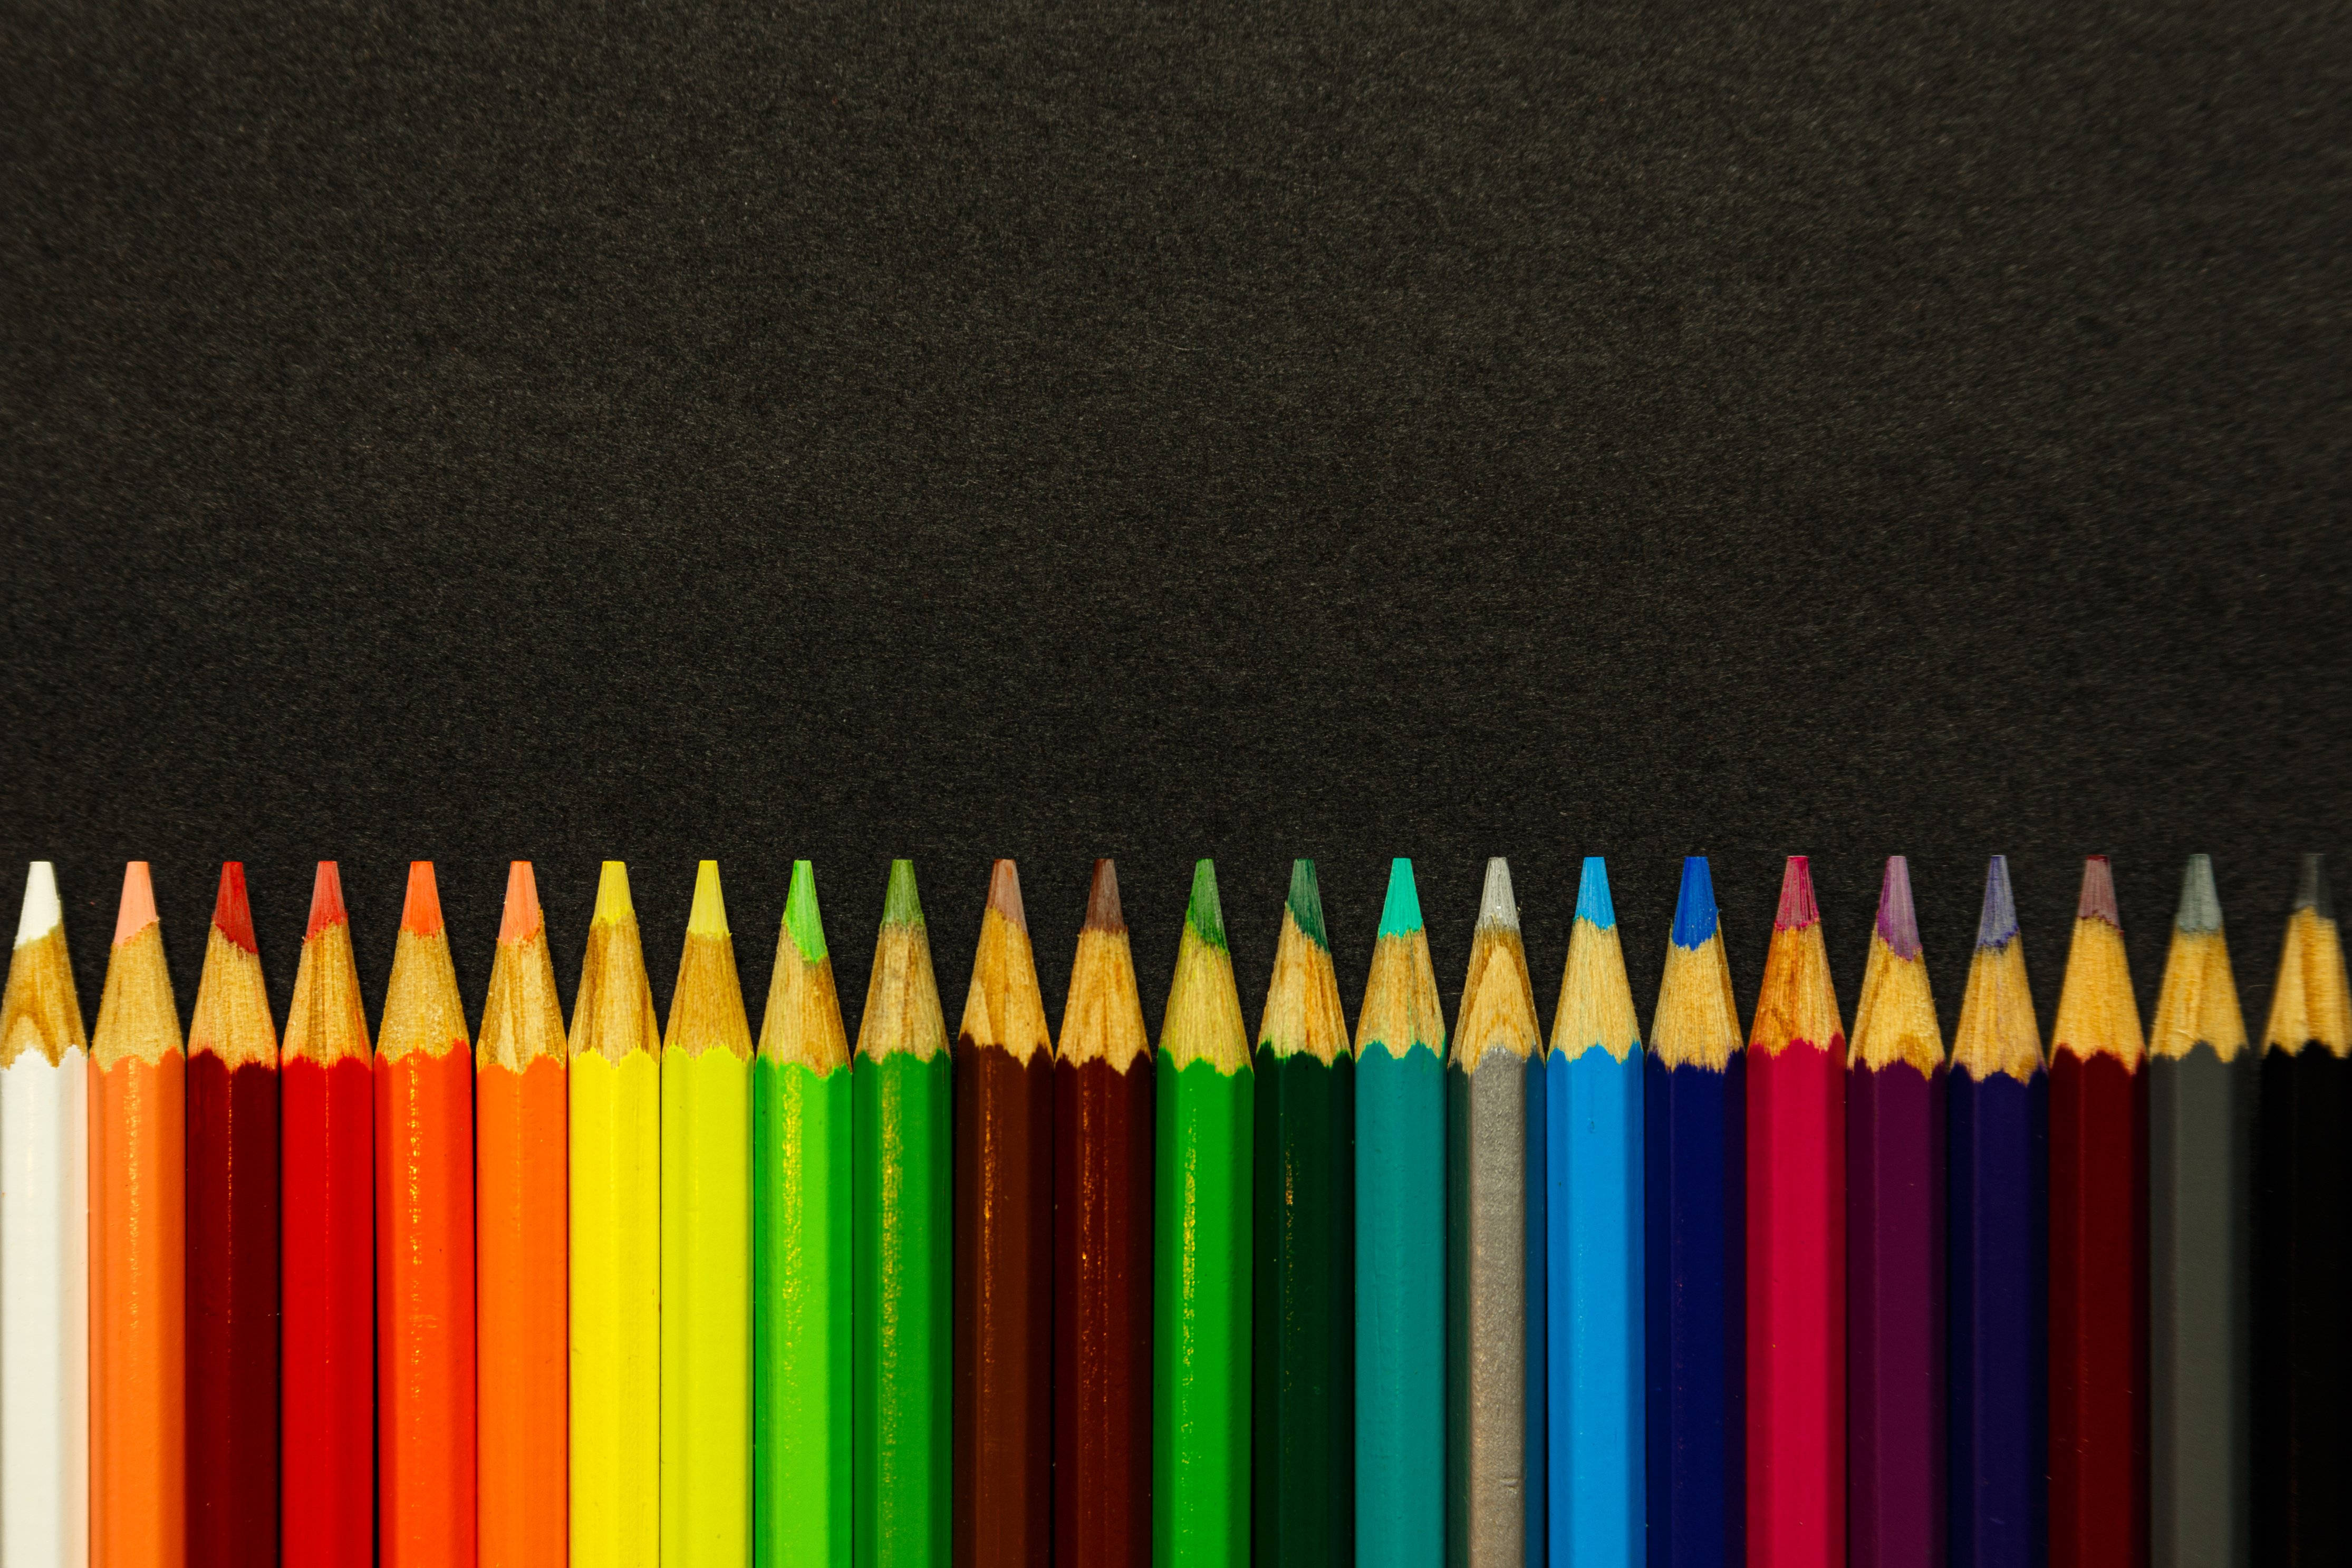 Download Colored Sharp Pencils Against Black Surface Wallpaper | Wallpapers .com